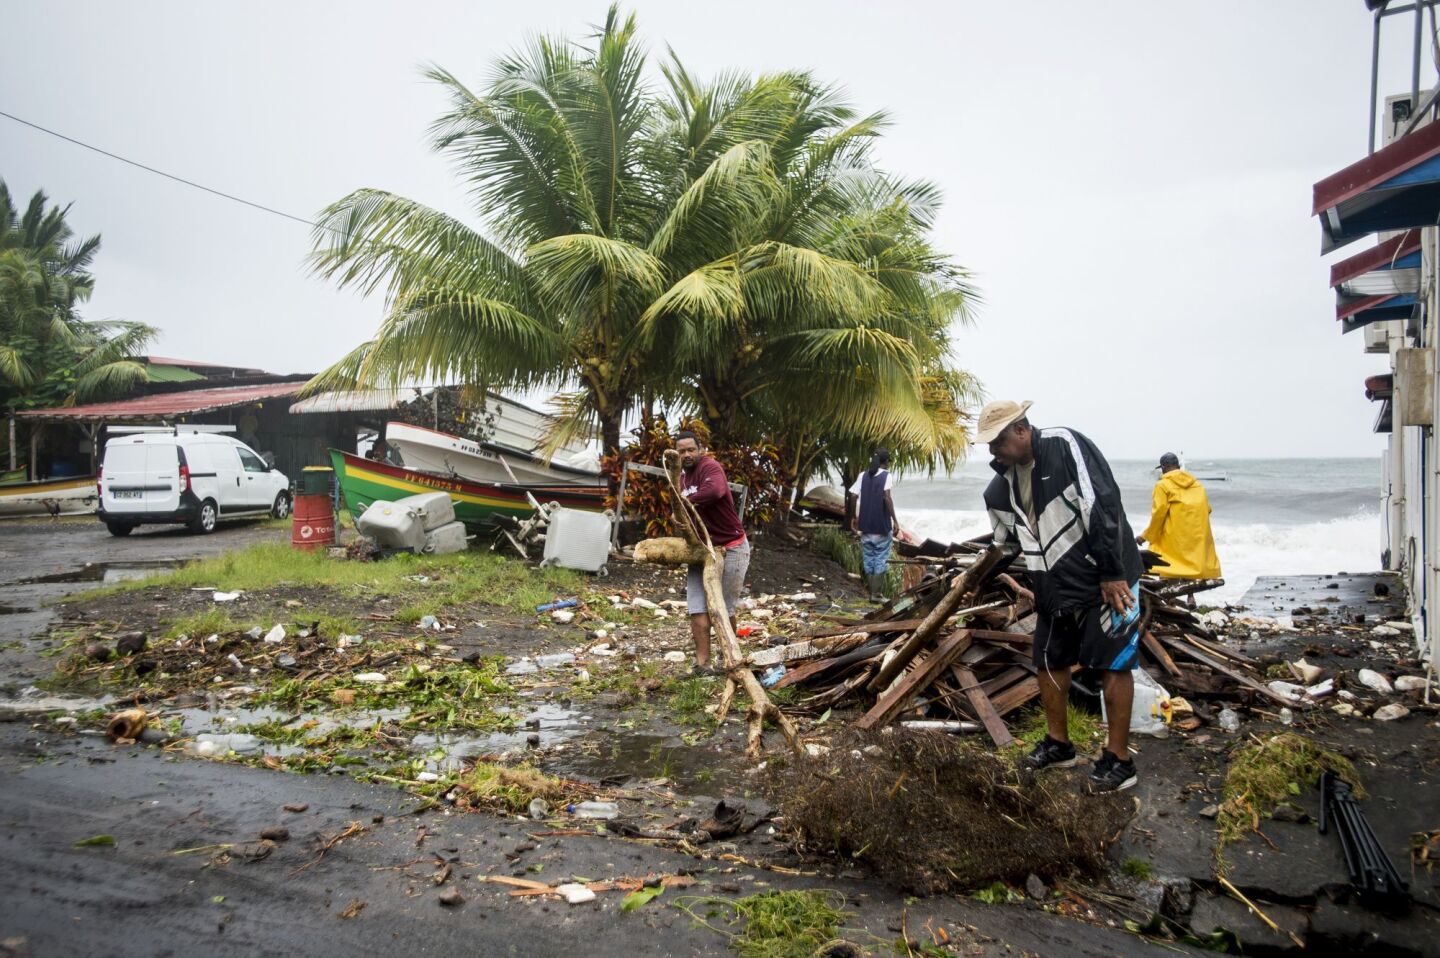 People clear debris in Saint-Pierre, on the French Caribbean island of Martinique, after it was hit by Hurricane Maria.